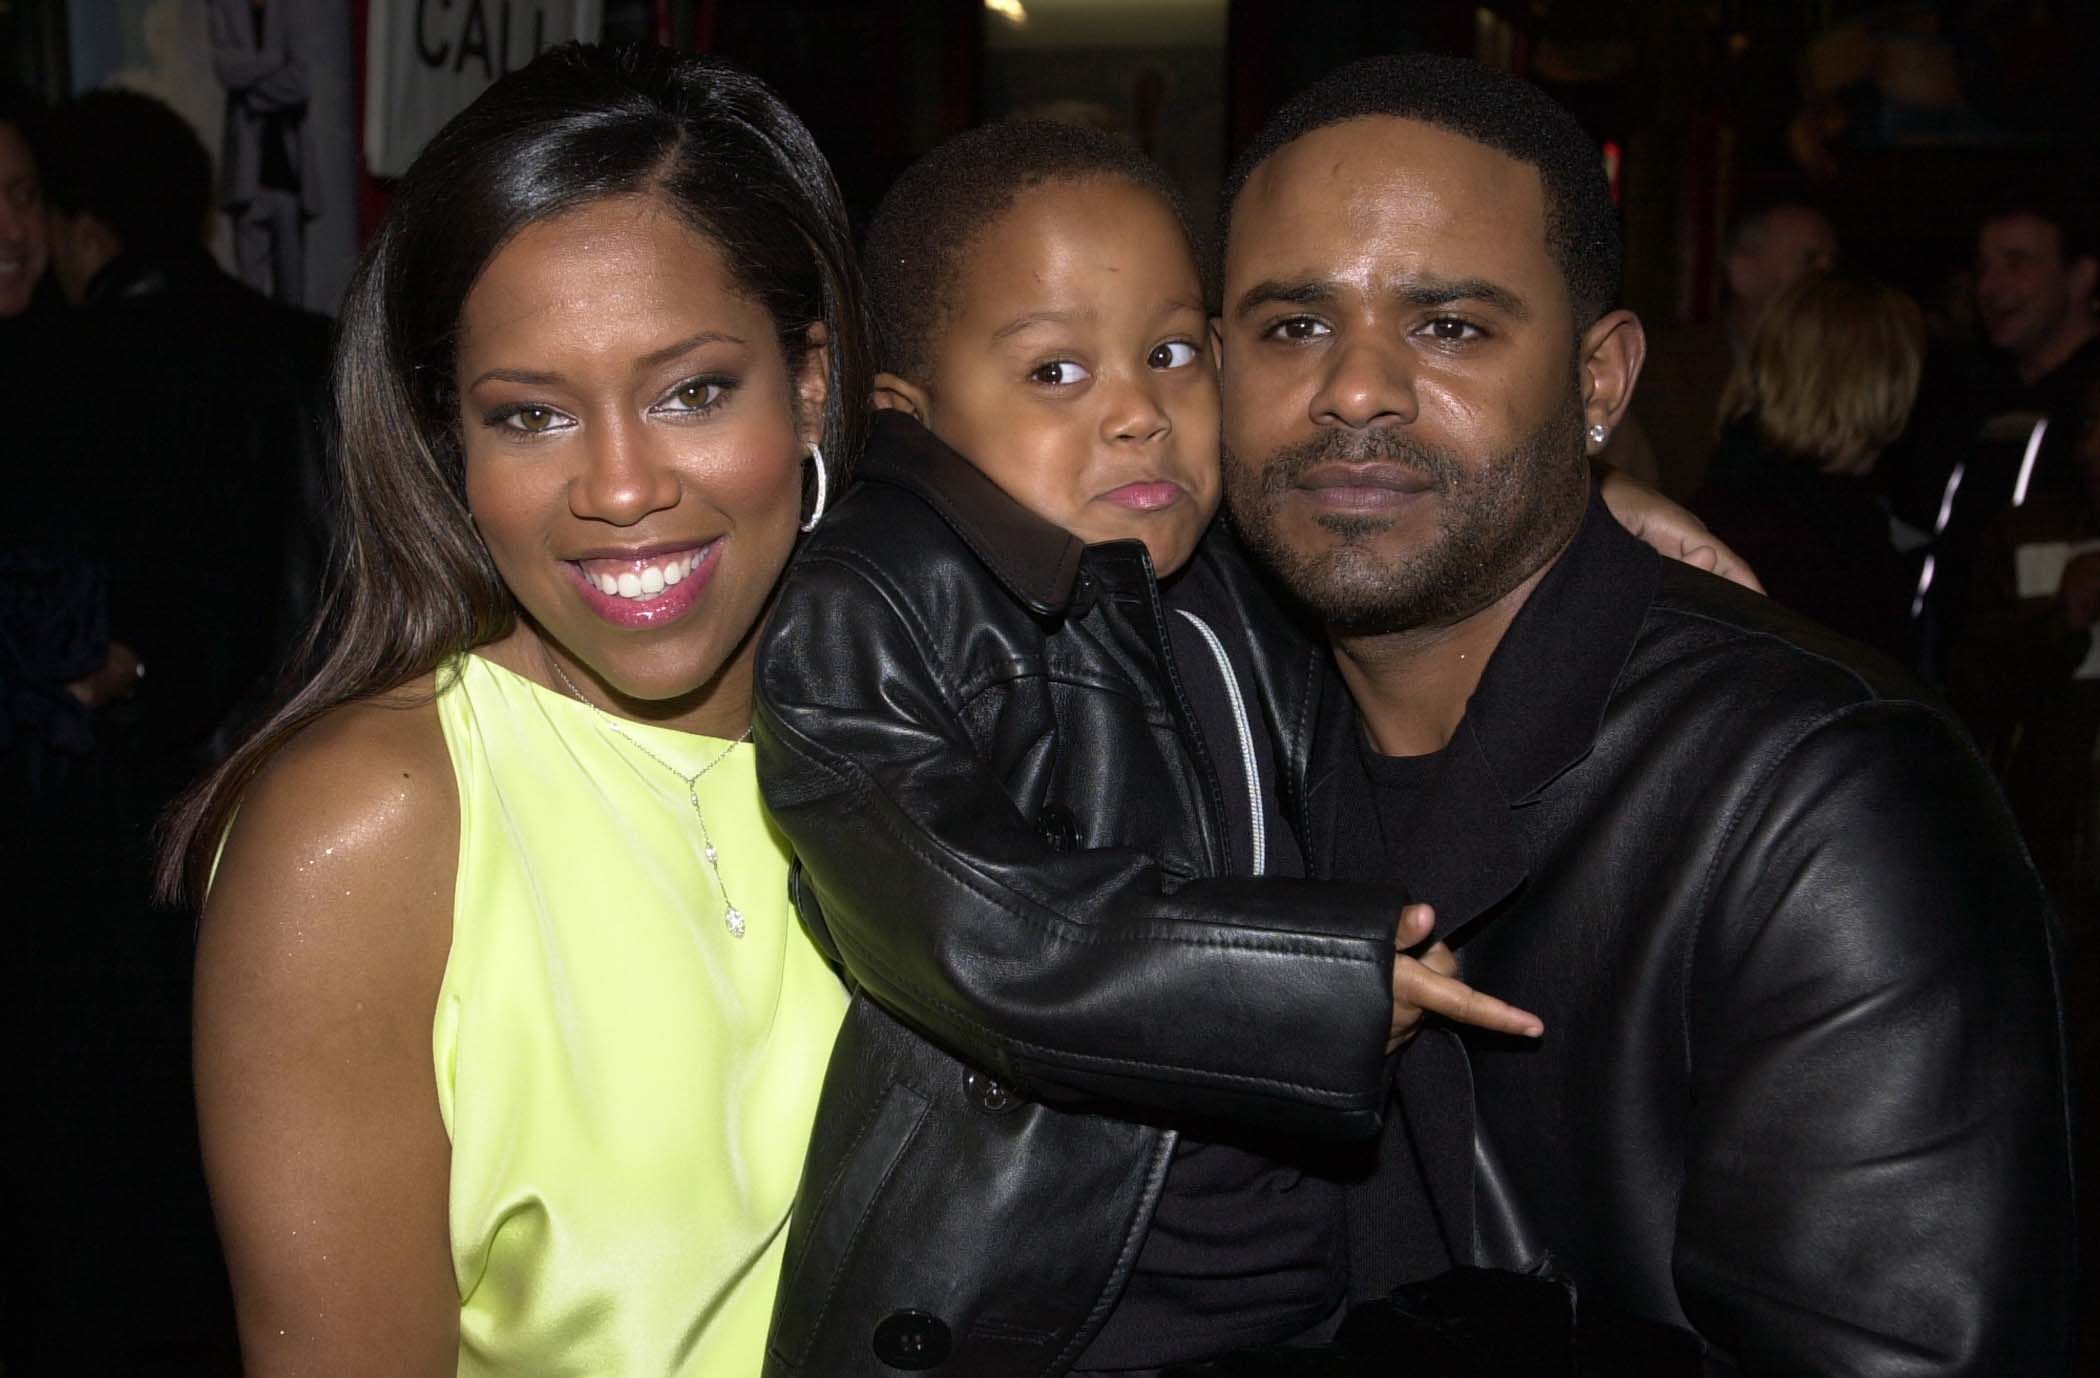 Regina King, Ian Alexander Jr and Ian Alexander during Down to Earth Premiere, 2001 | Photo: Getty Images